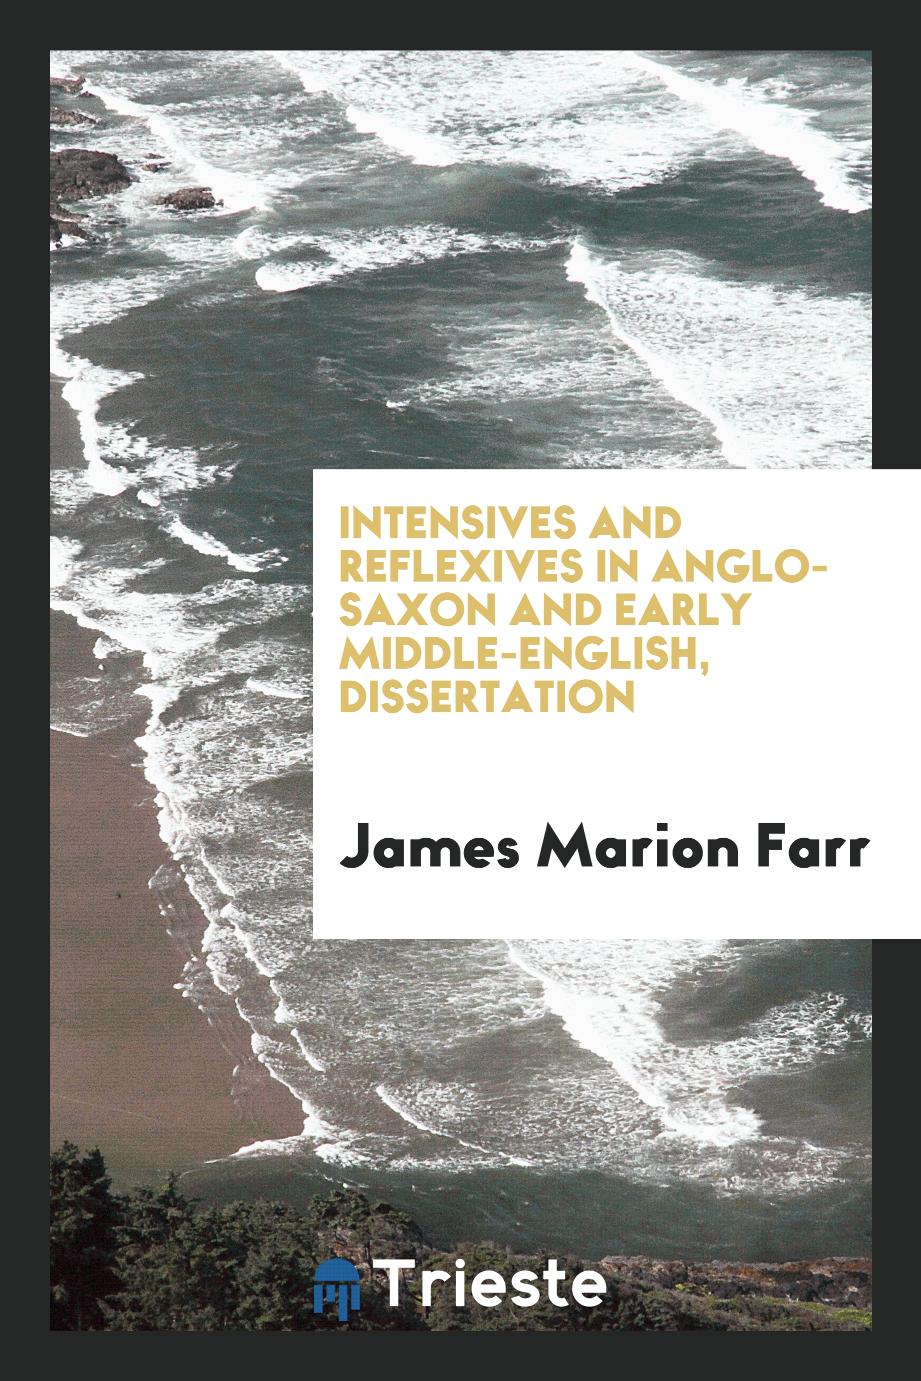 Intensives and reflexives in Anglo-Saxon and early Middle-English, dissertation